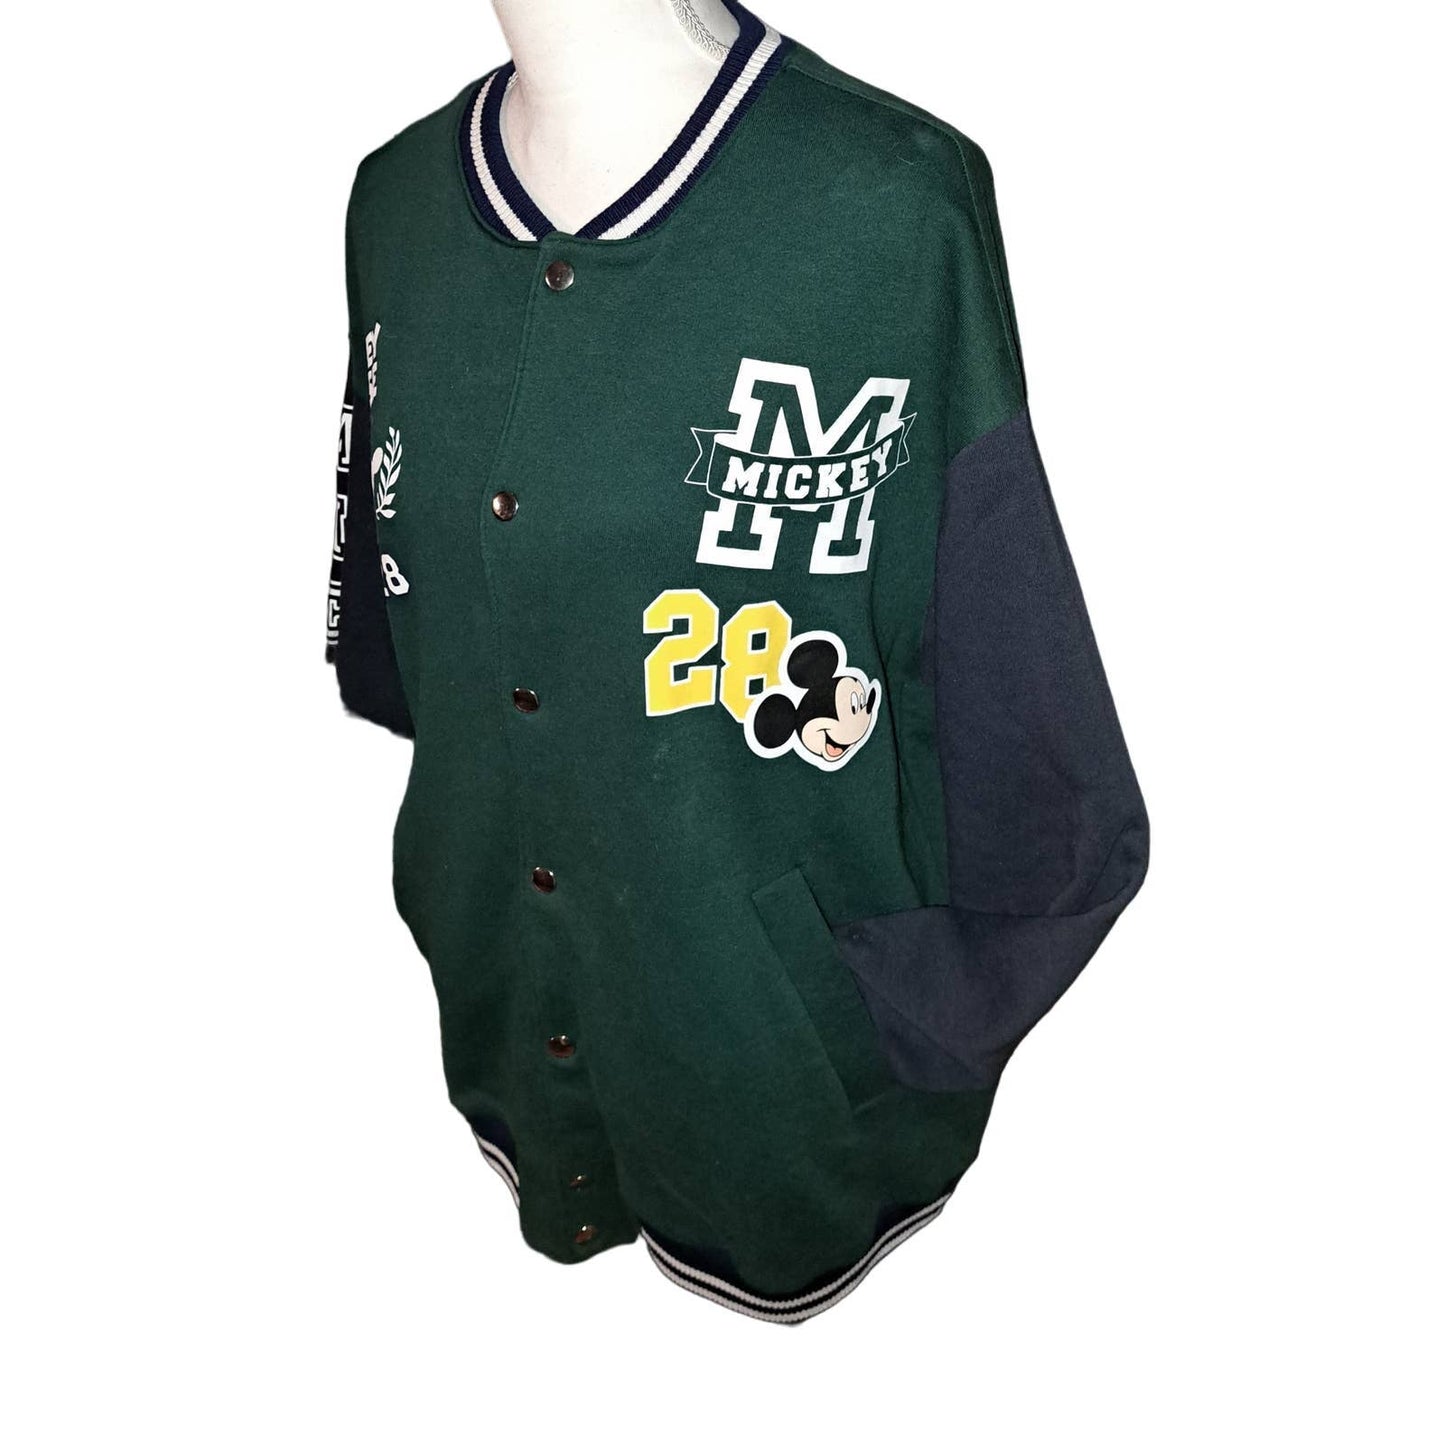 NWT- H&M ADORABLE Mickey Adult Letterman Jersey Sweatshirt Material Small